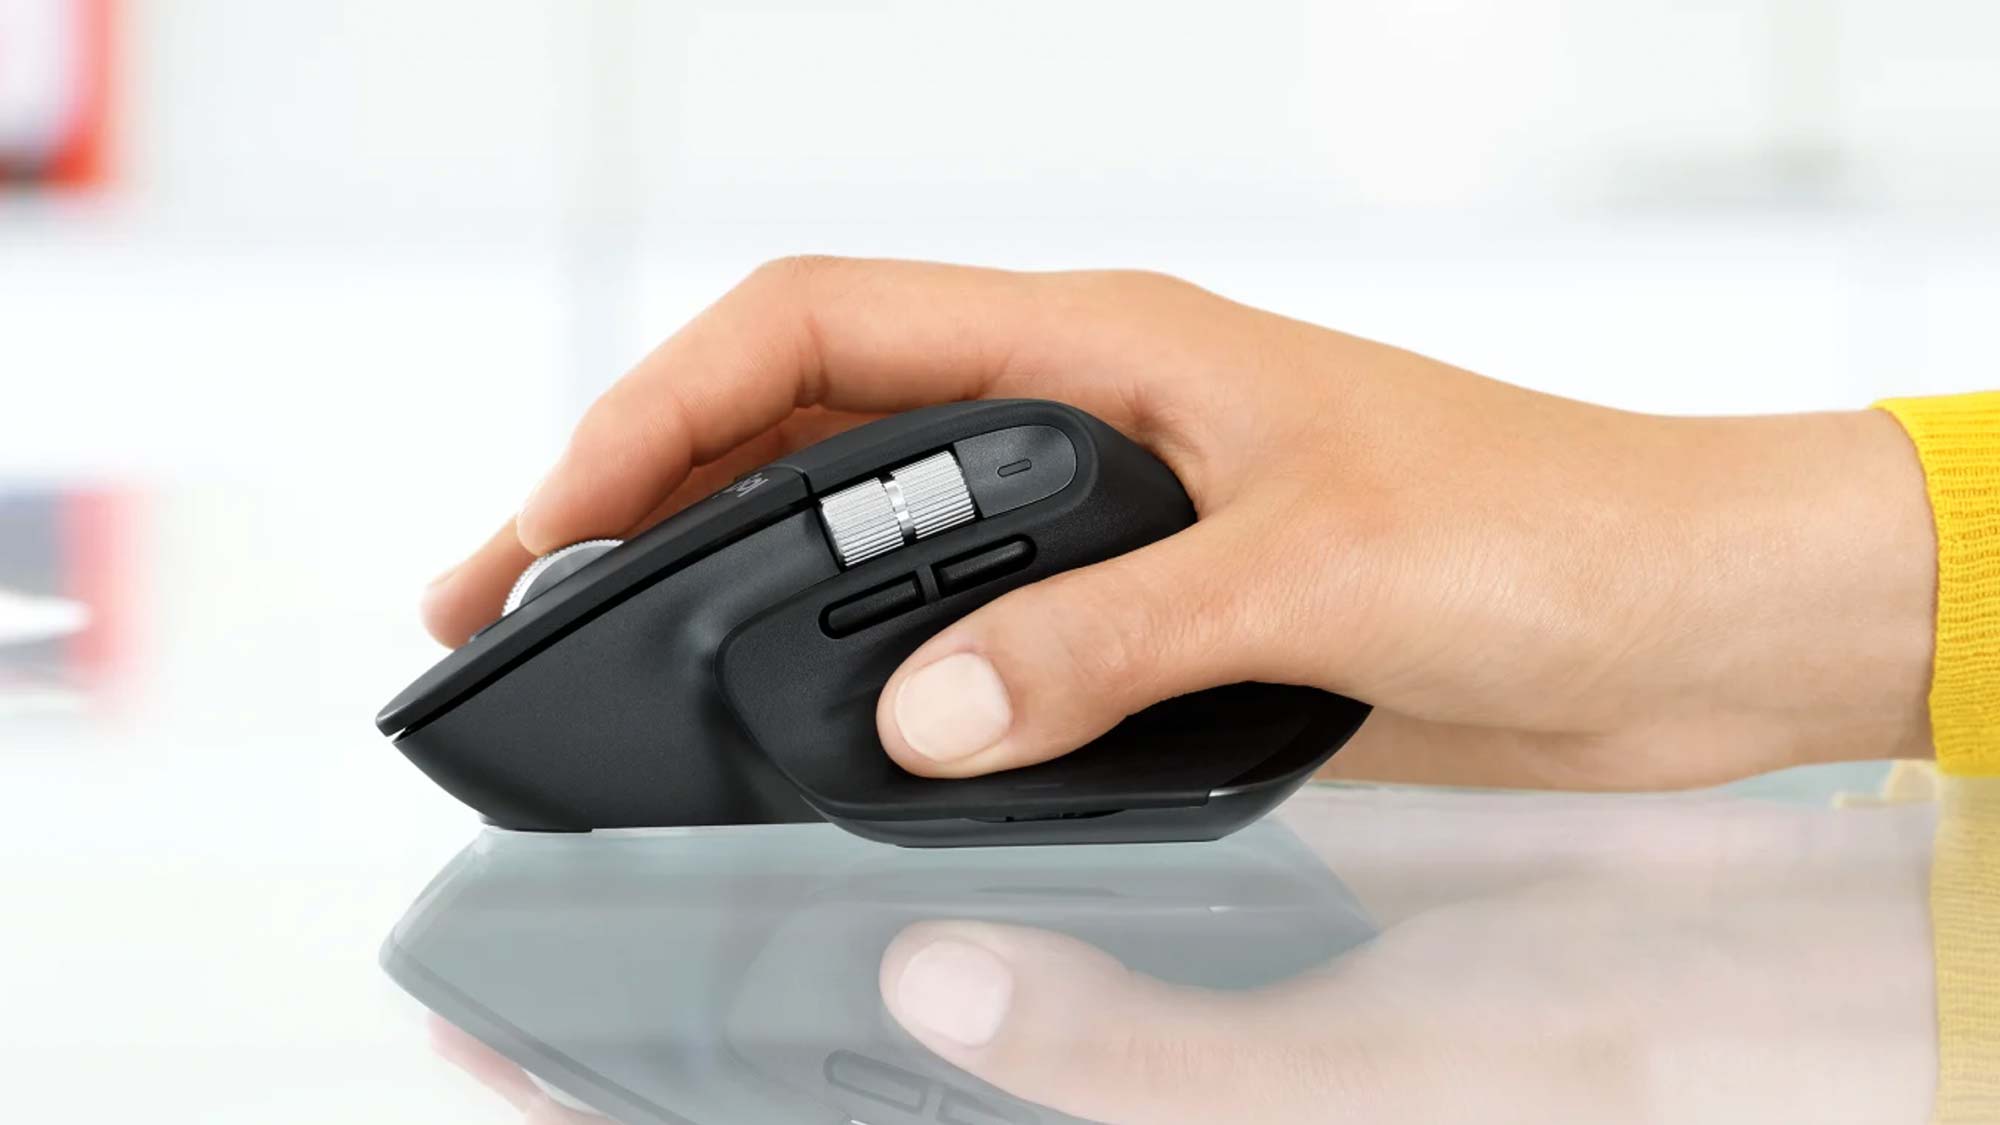 Logitech MX Anywhere 2 Wireless Mouse Review - Legit Reviews